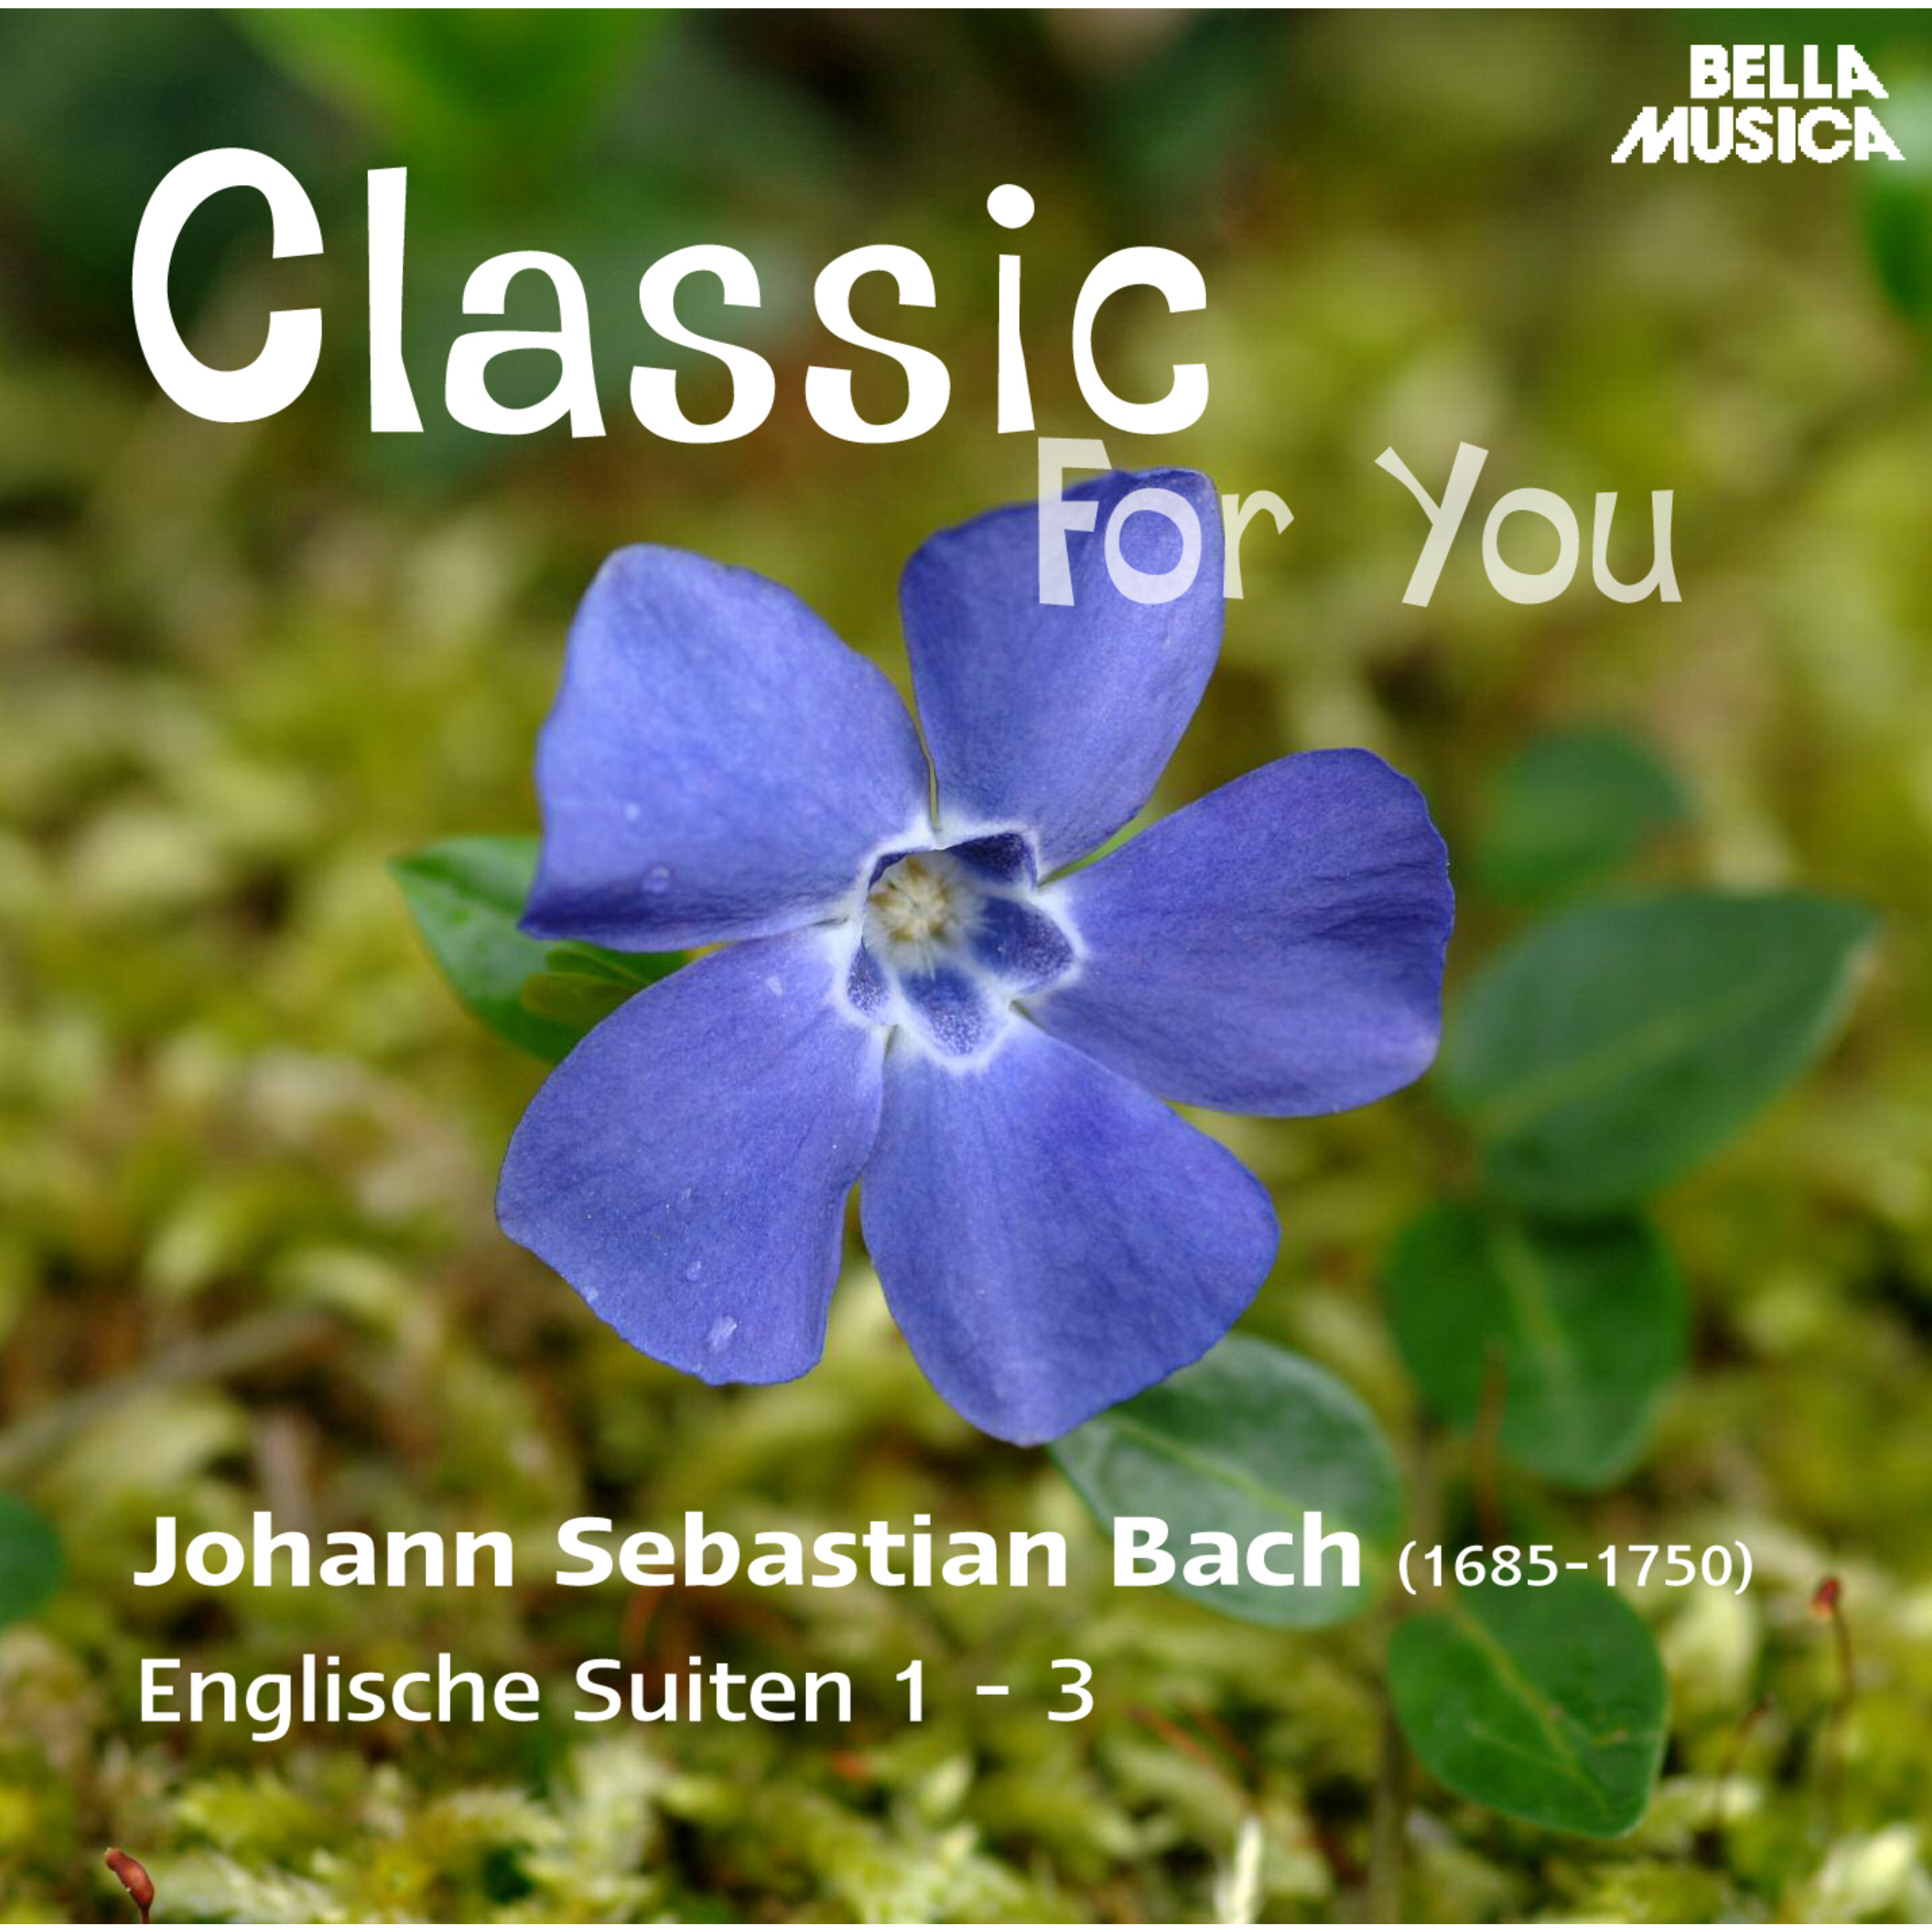 Classic for You: Bach: Englische Suiten 1 - 3